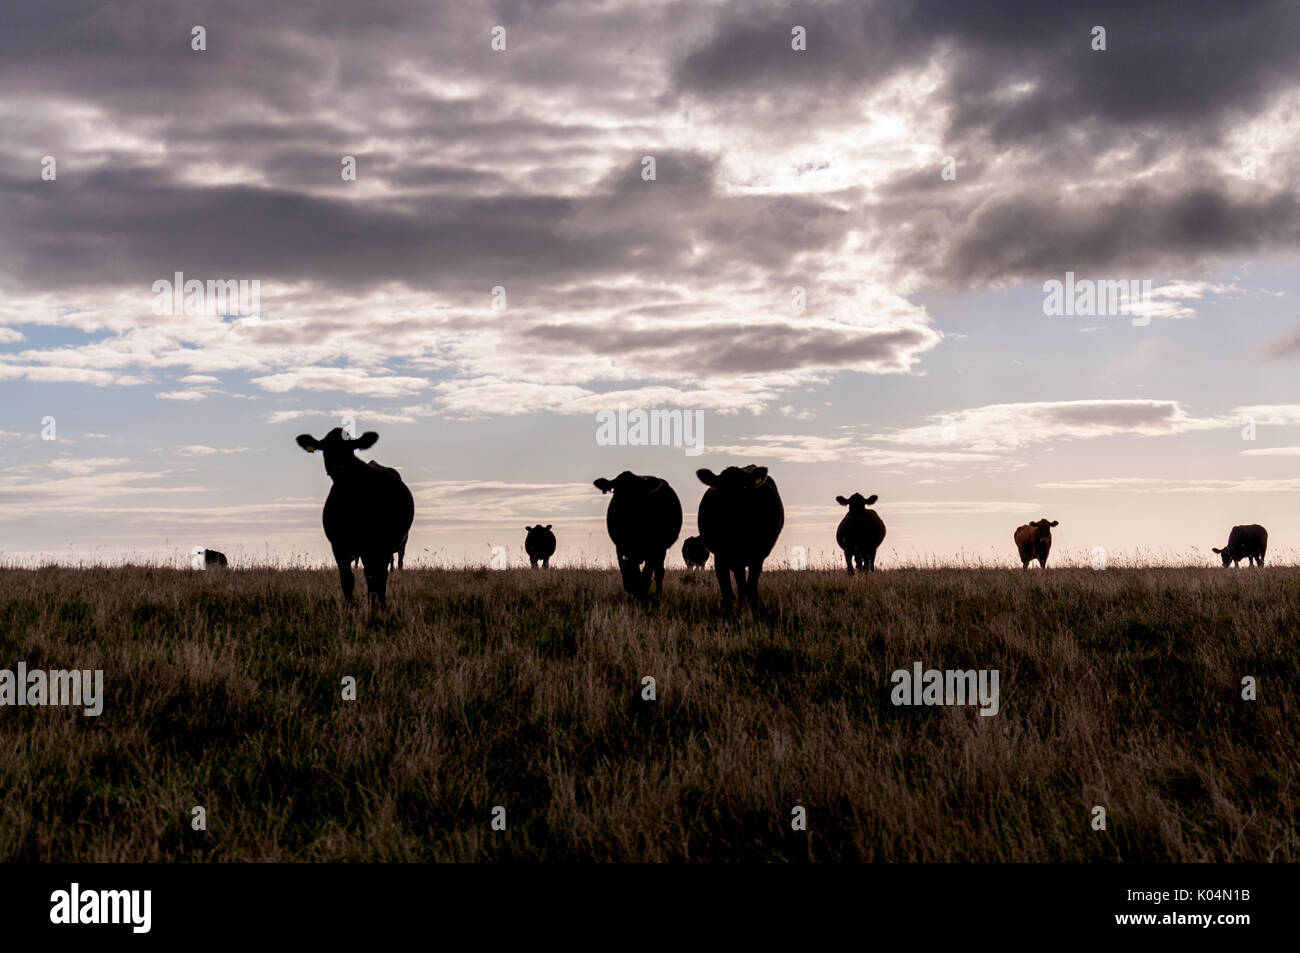 Beef cattle in a field silhouettes Stock Photo